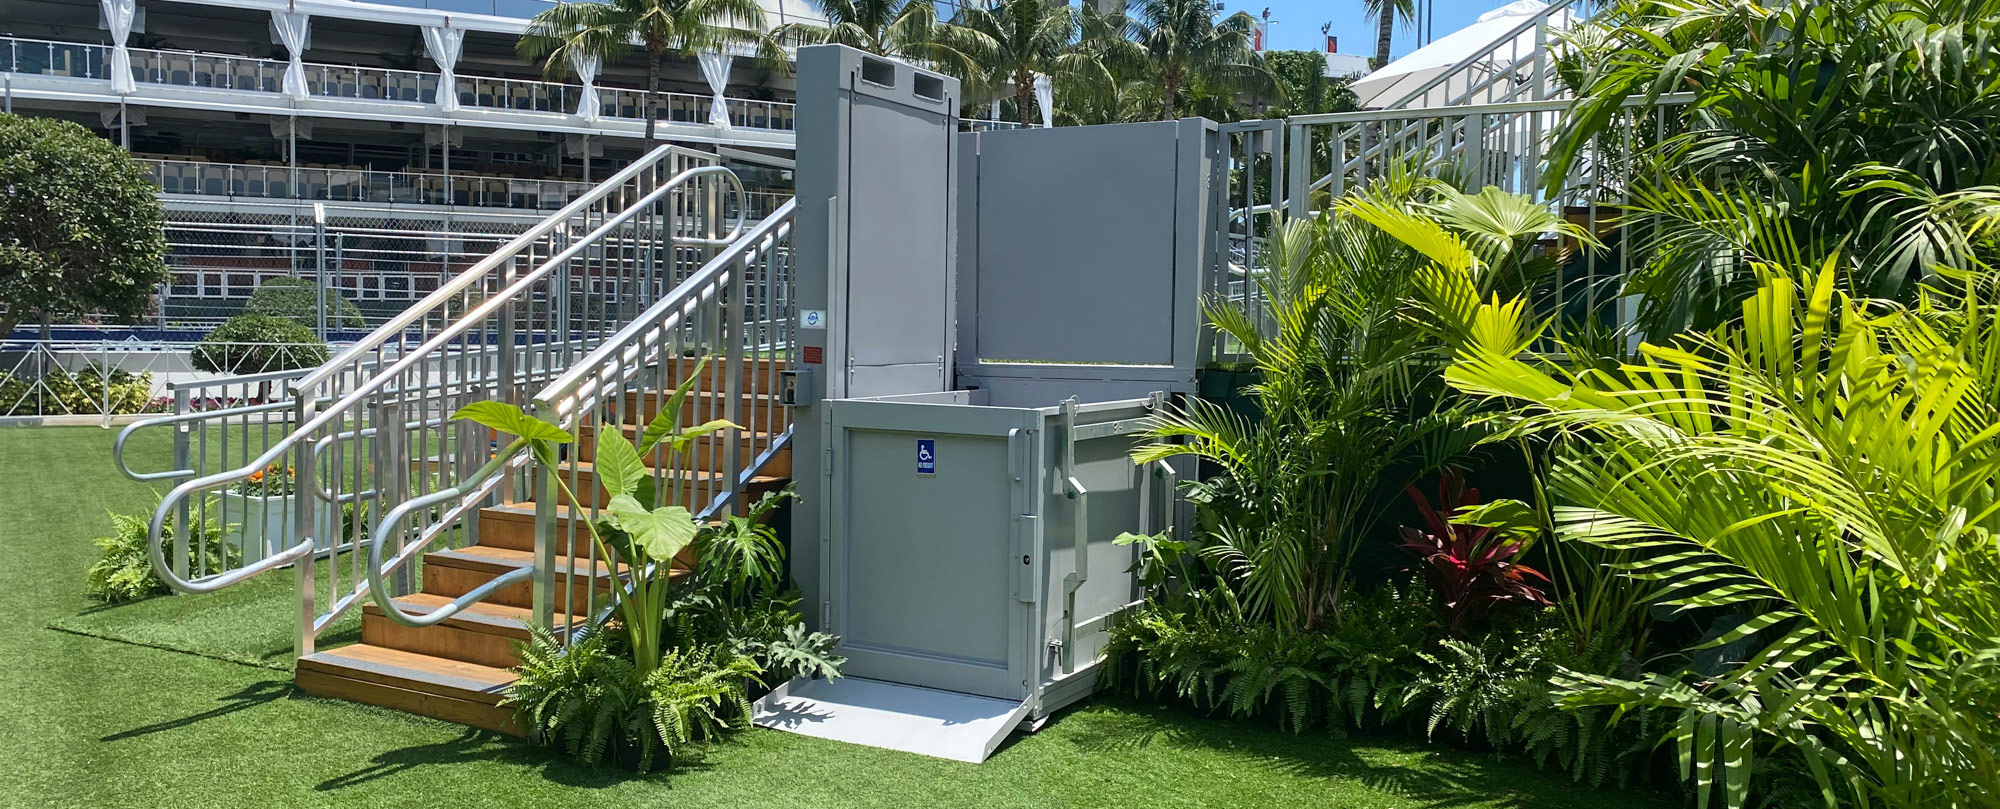 6' grey ADA wheelchair lift rental next to stairs and greenery at the Miami Grand Prix